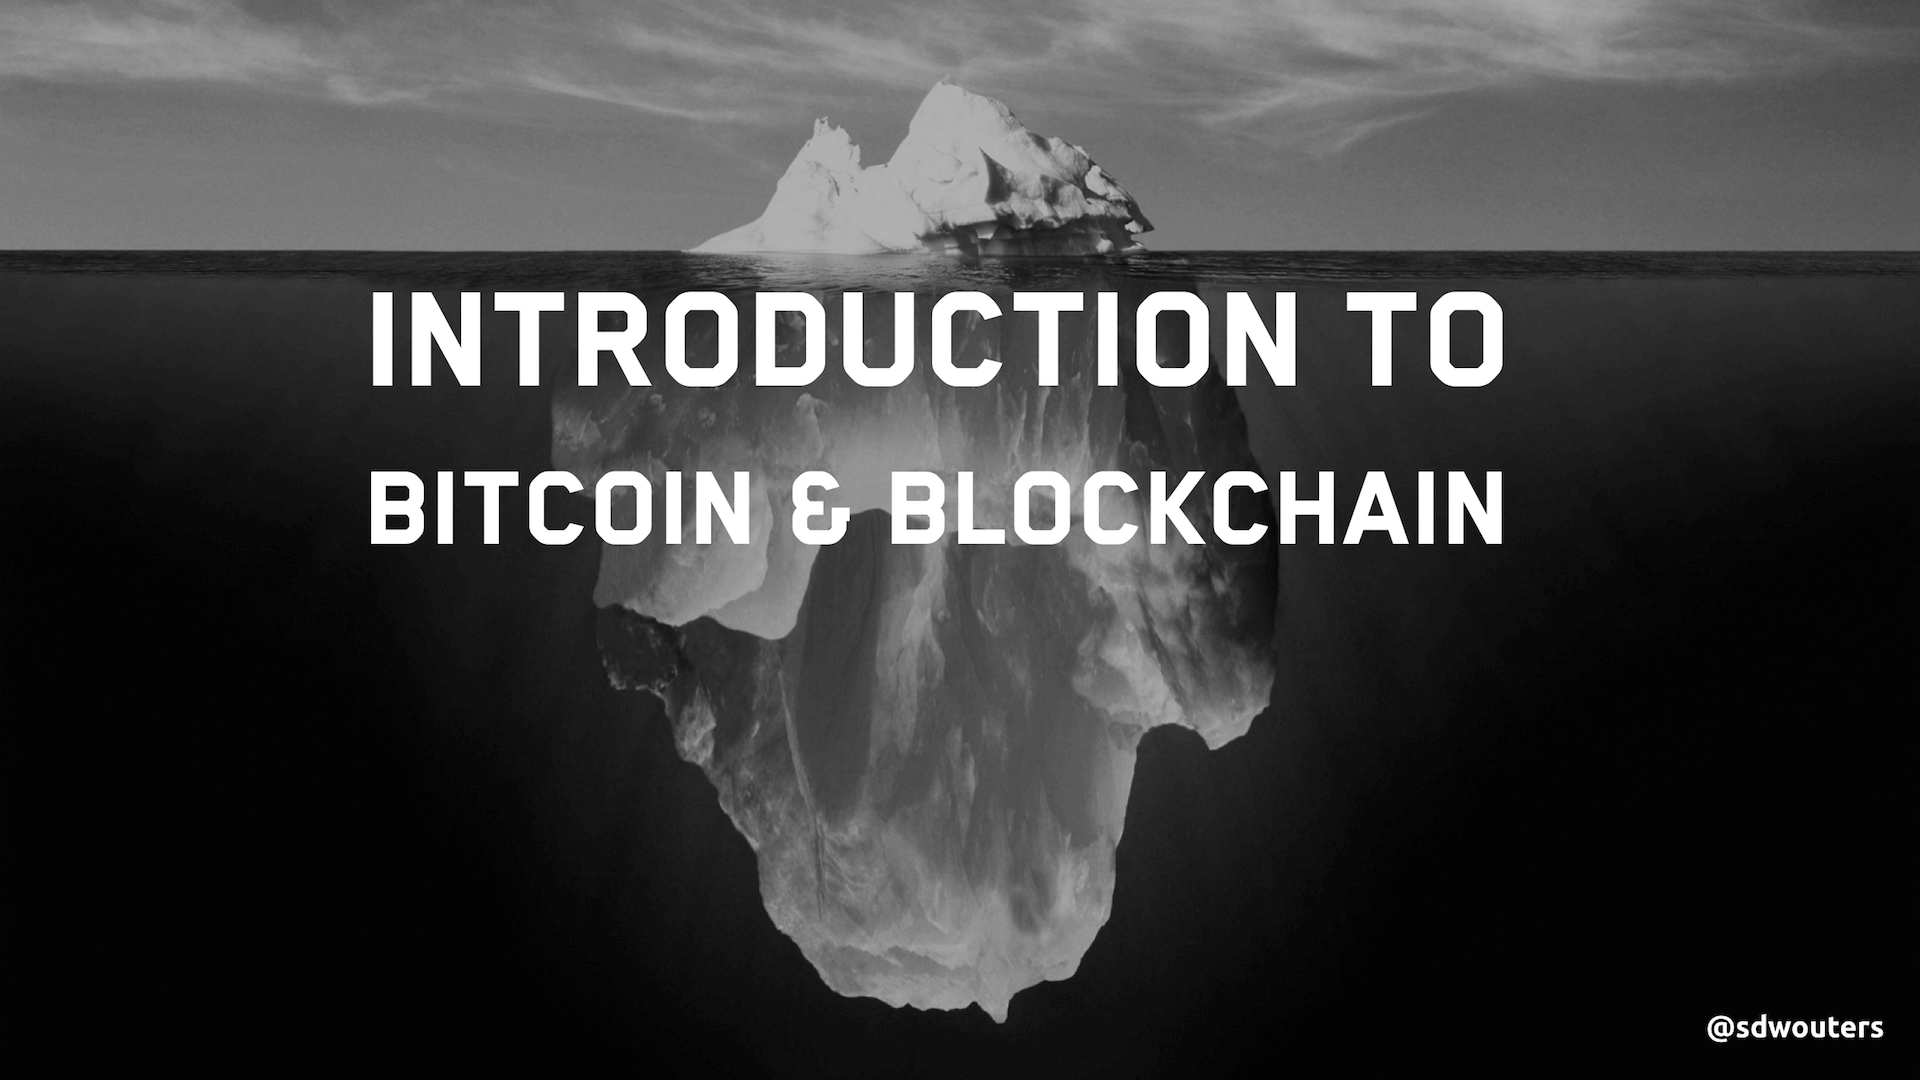 Introduction to Bitcoin and Blockchain